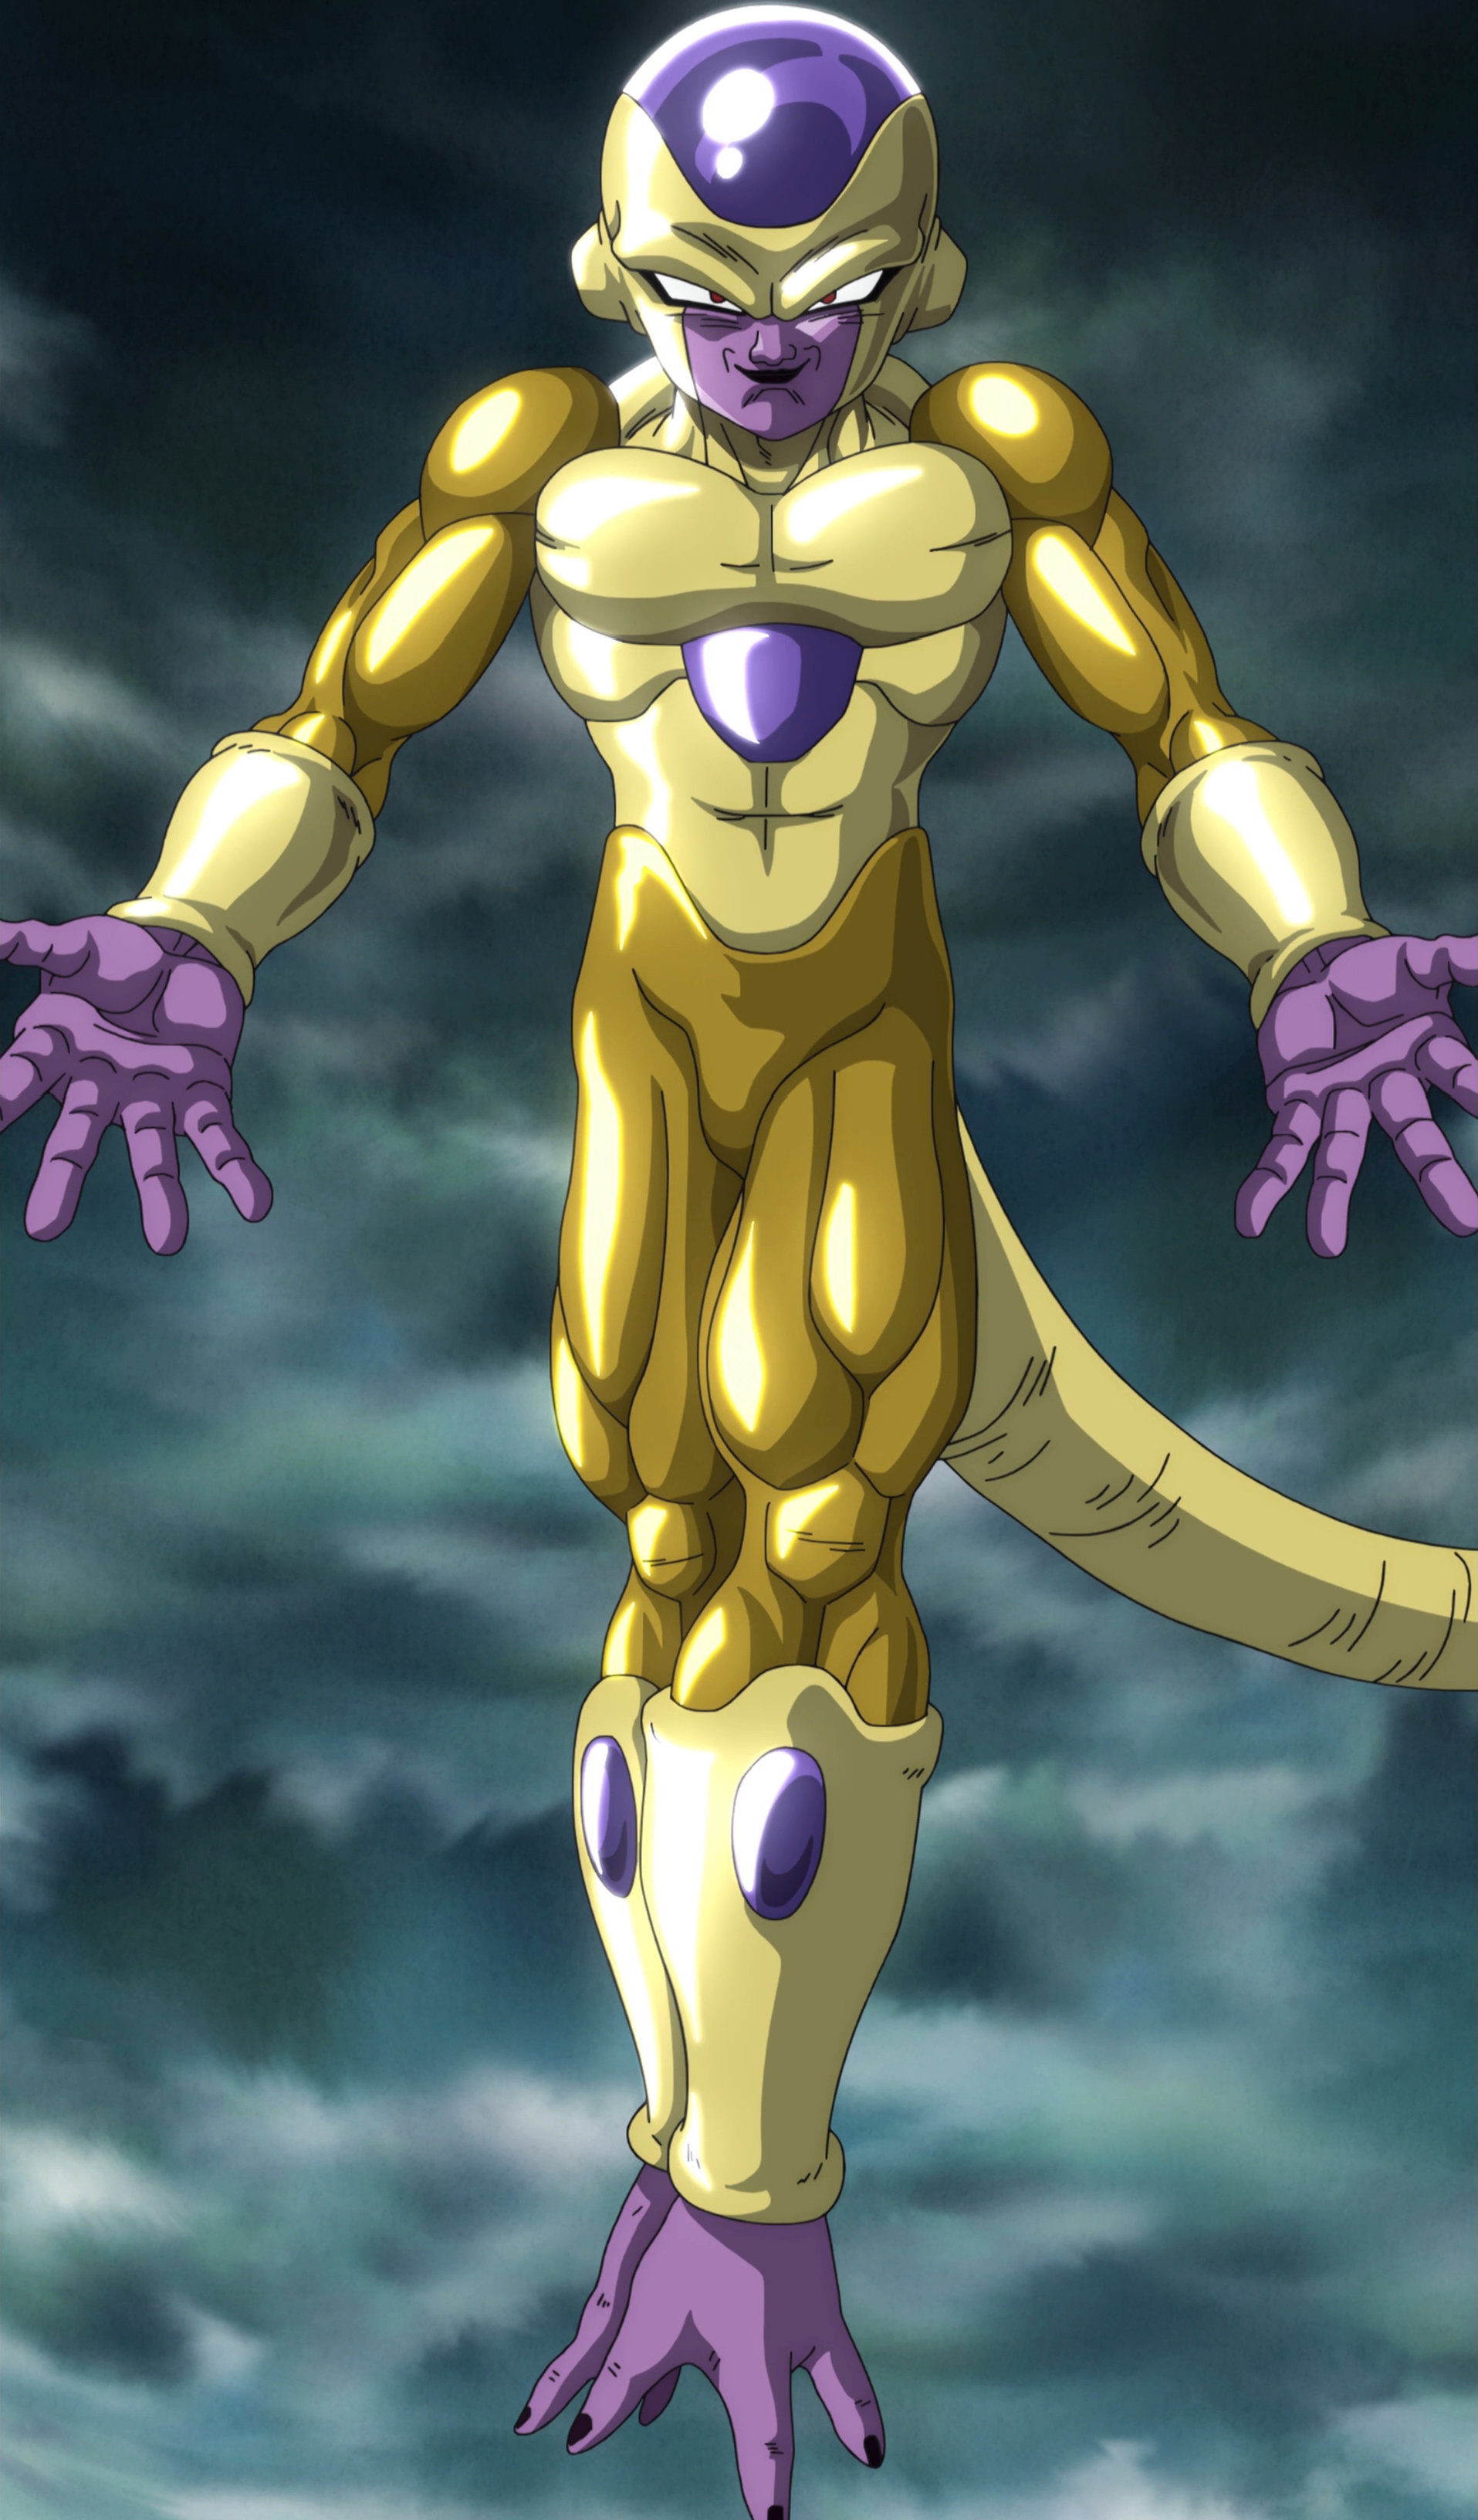 Golden frieza candy lucius